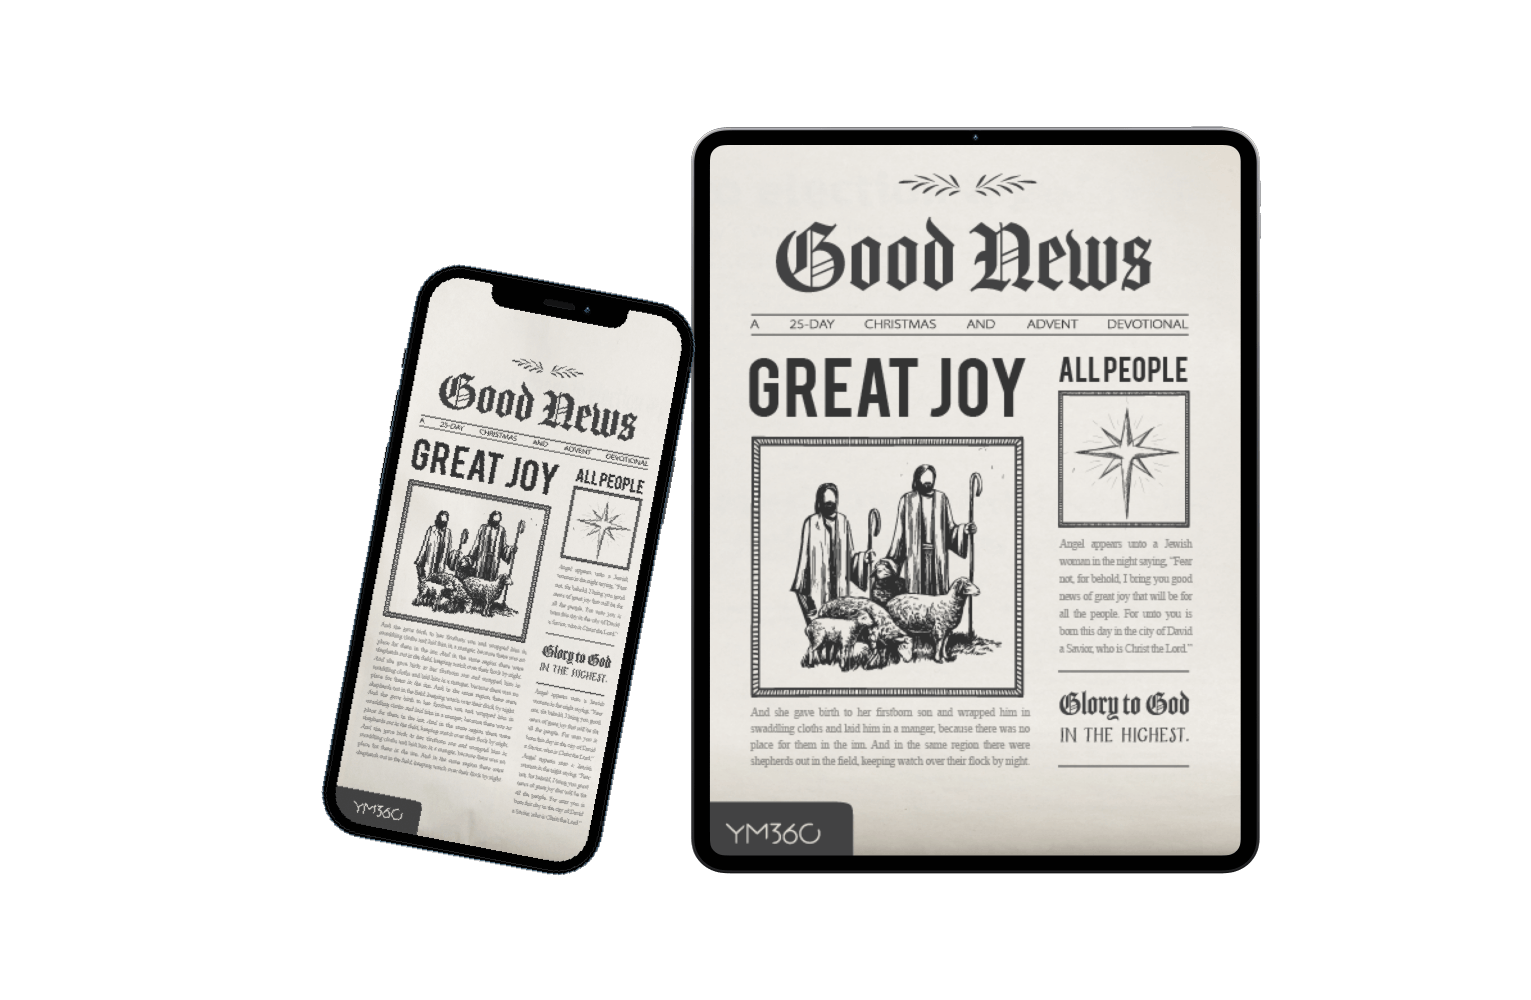 [DOWNLOADABLE VERSION] Good News, Great Joy, All People: A 25-Day Christmas and Advent Devotional